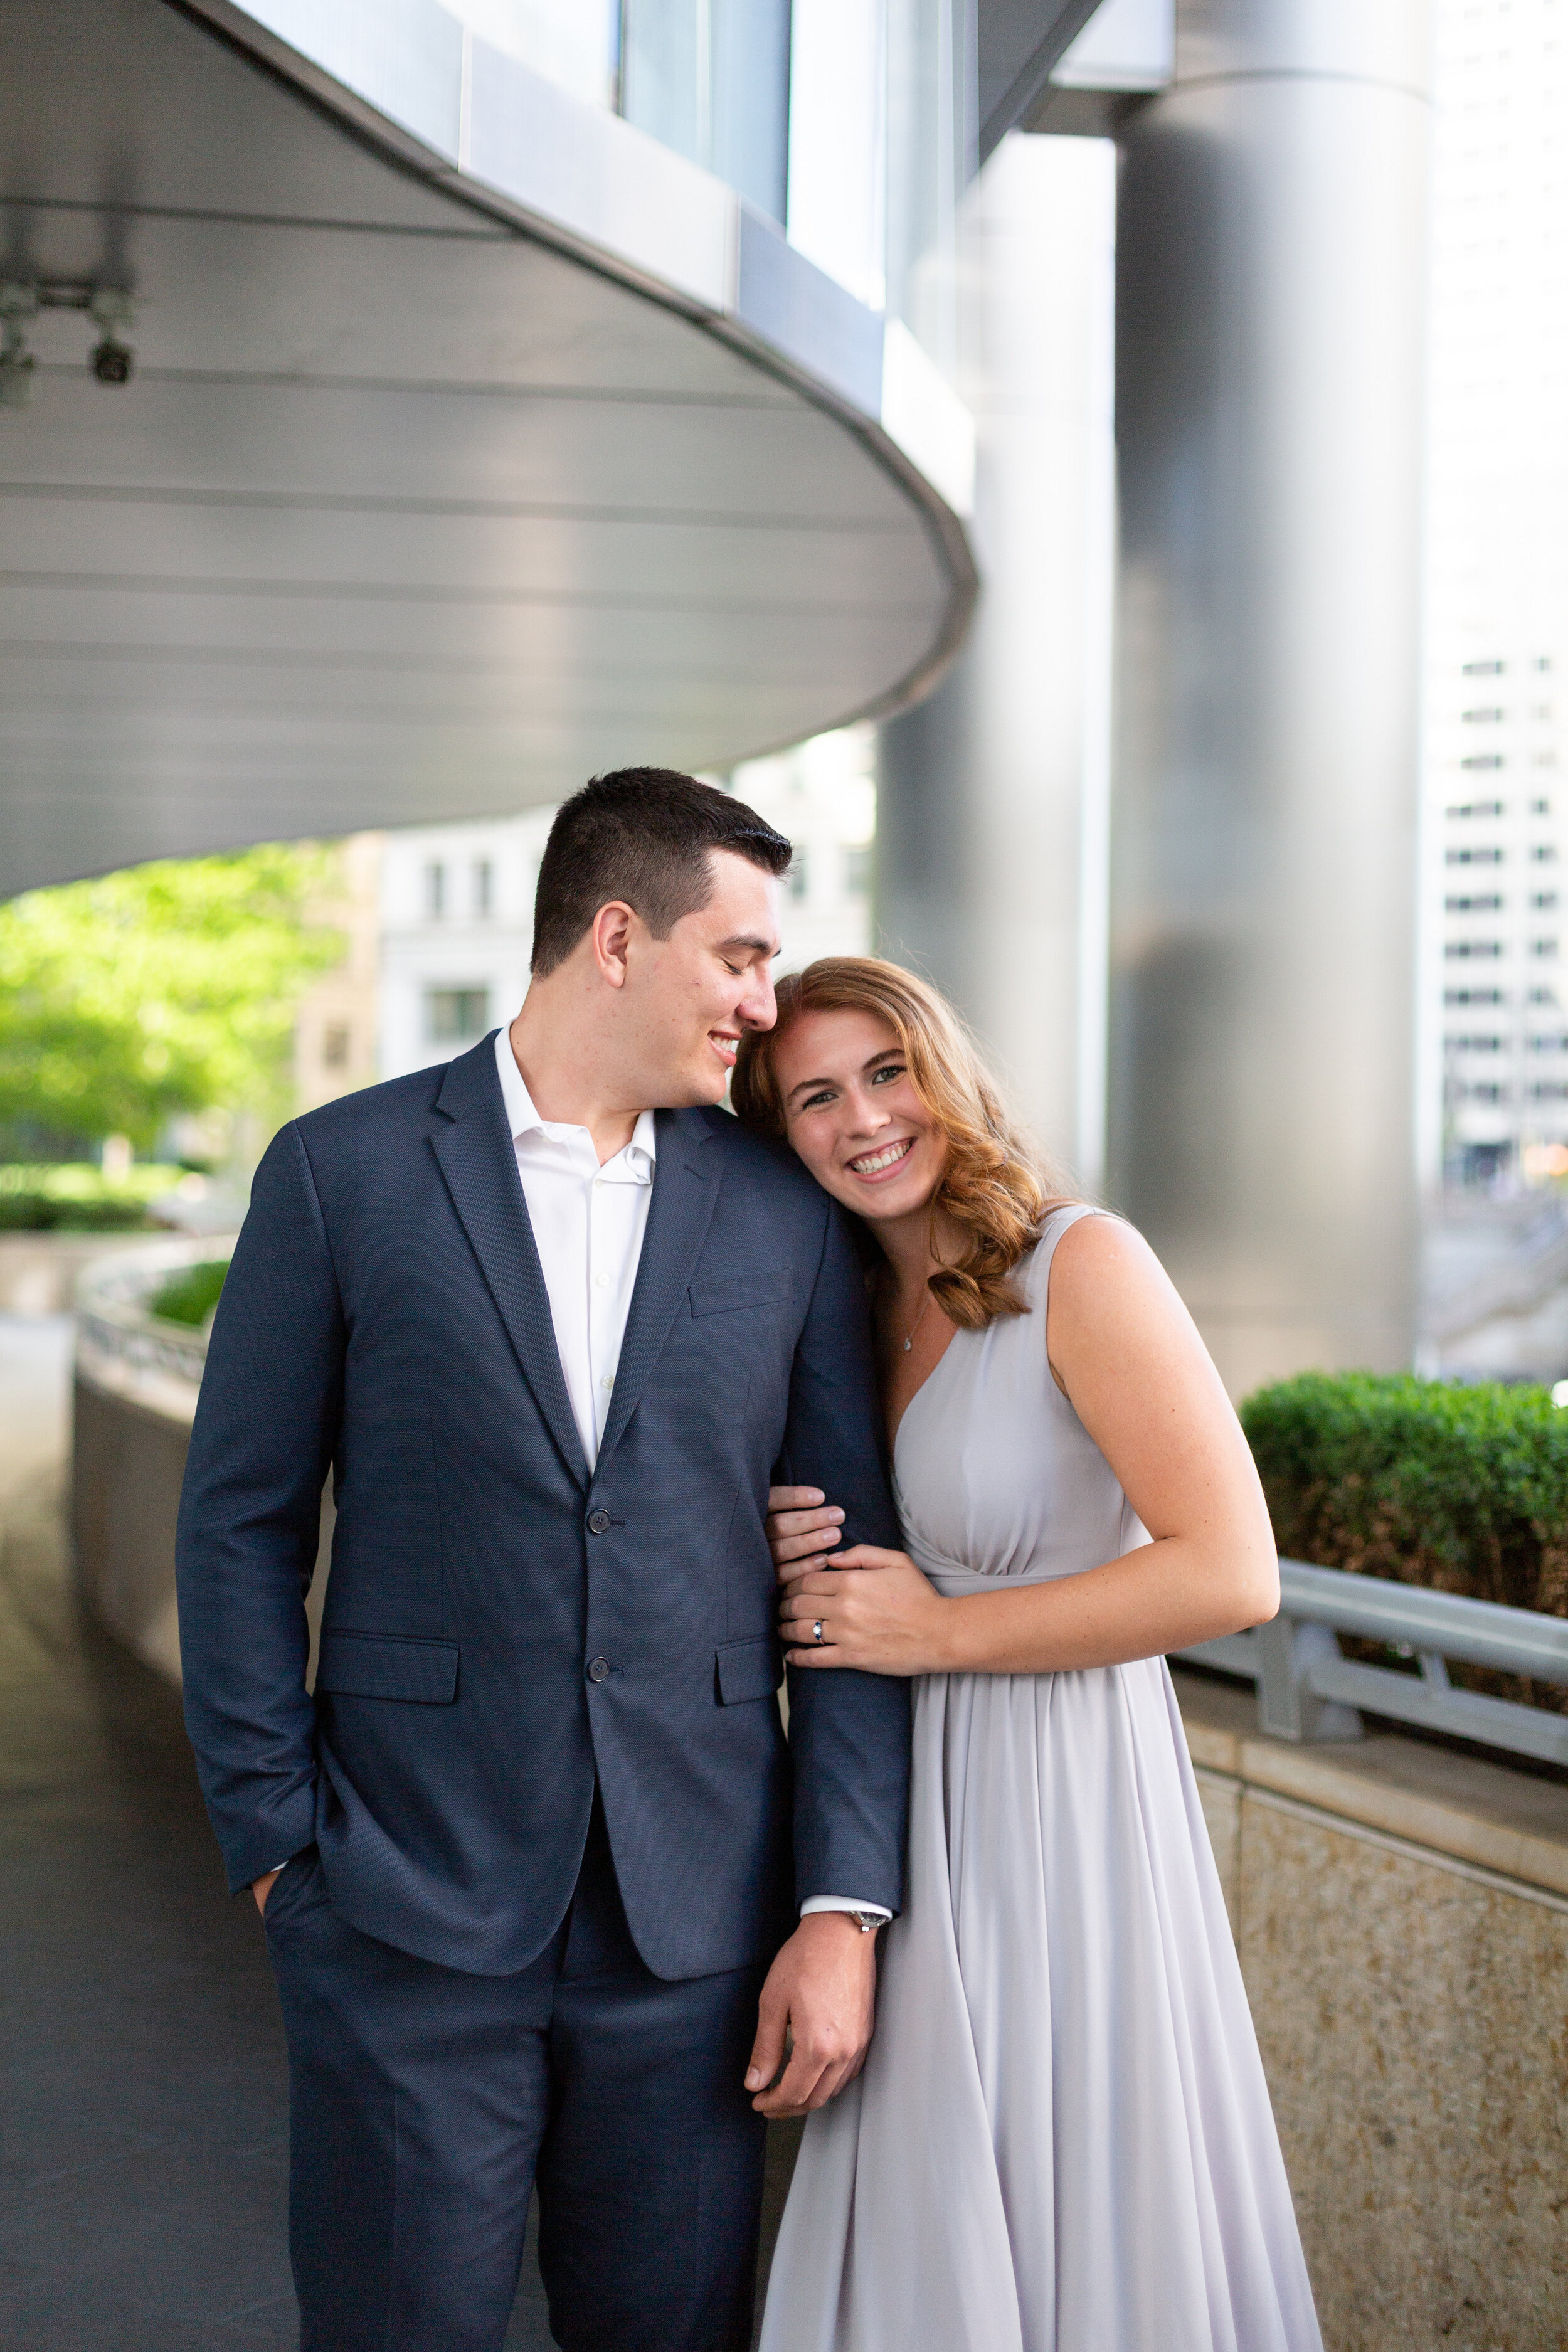 Scenic Chicago Engagement Session captured by Grace Rios Photography featured on CHI thee WED